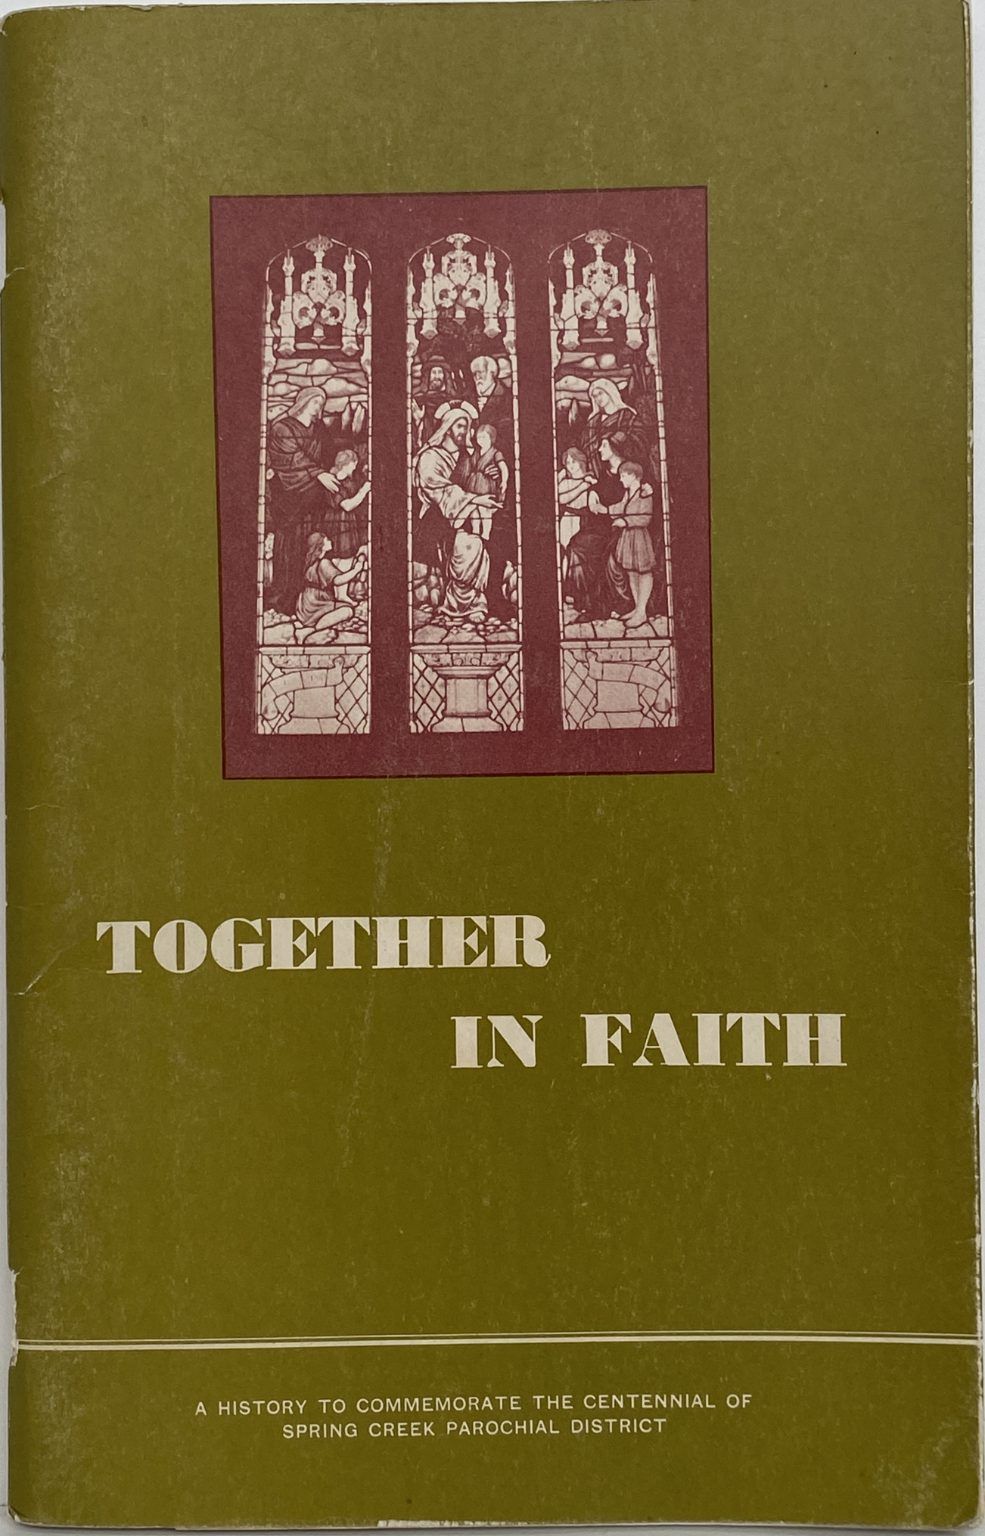 TOGETHER IN FAITH: History to Commemorate Spring Creek Parochial District